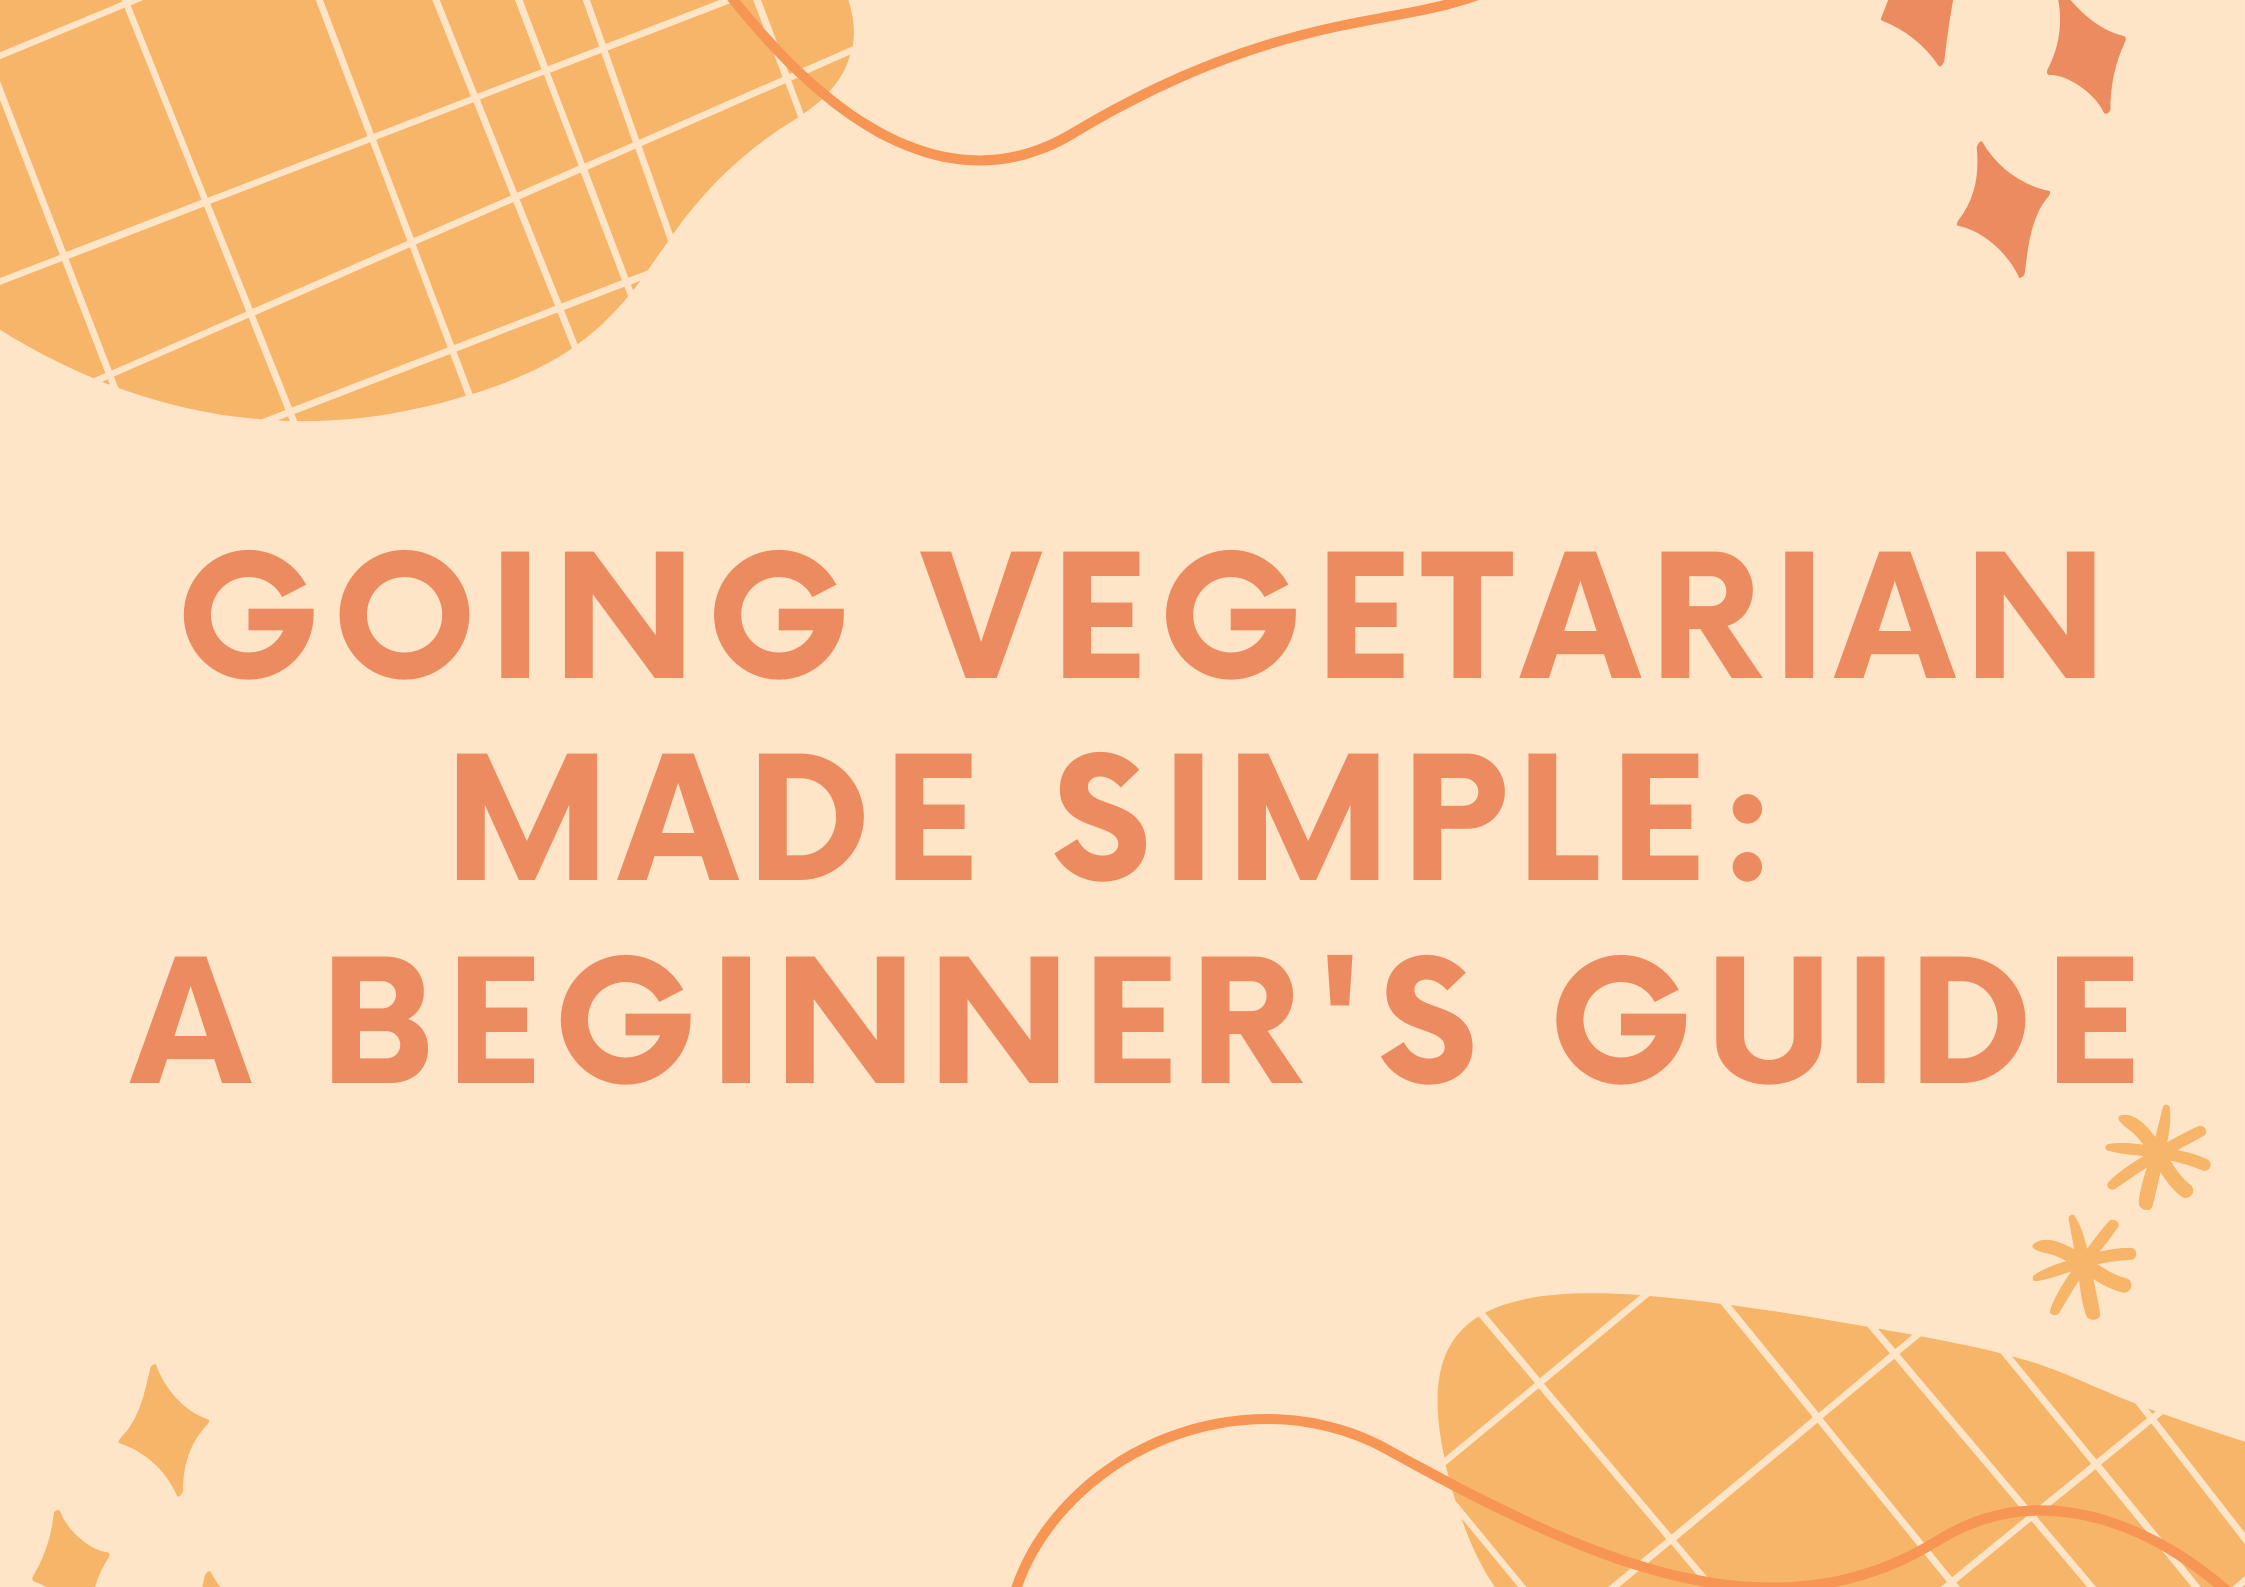 Going vegetarian made simple: a beginner’s guide